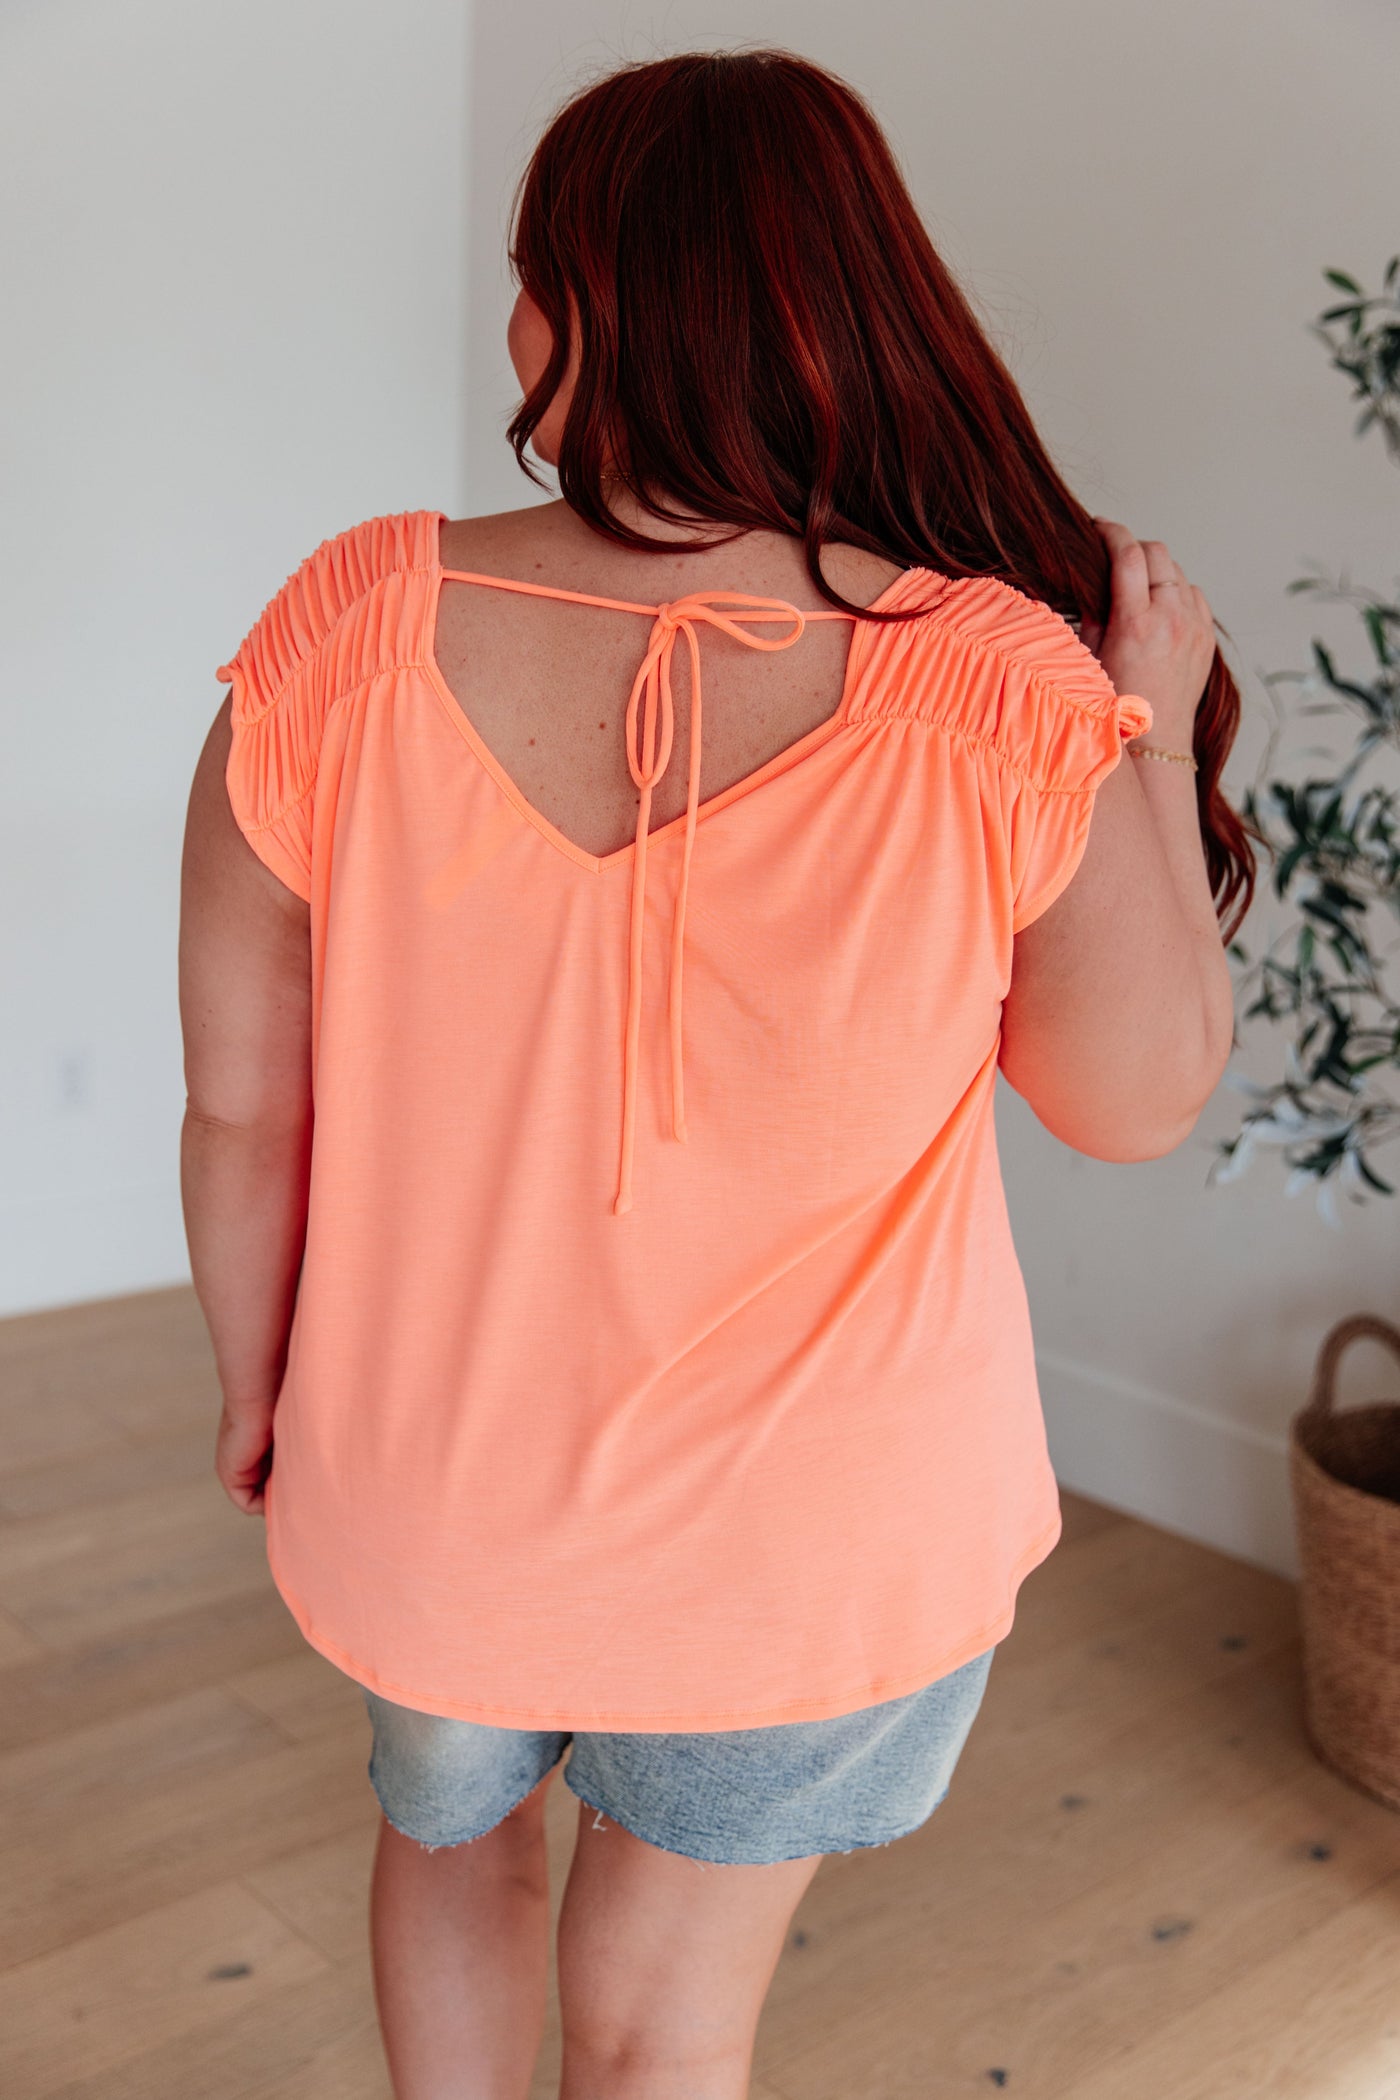 Ruched Cap Sleeve Top in Neon Orange-Womens-Ave Shops-Market Street Nest, Fashionable Clothing, Shoes and Home Décor Located in Mabank, TX